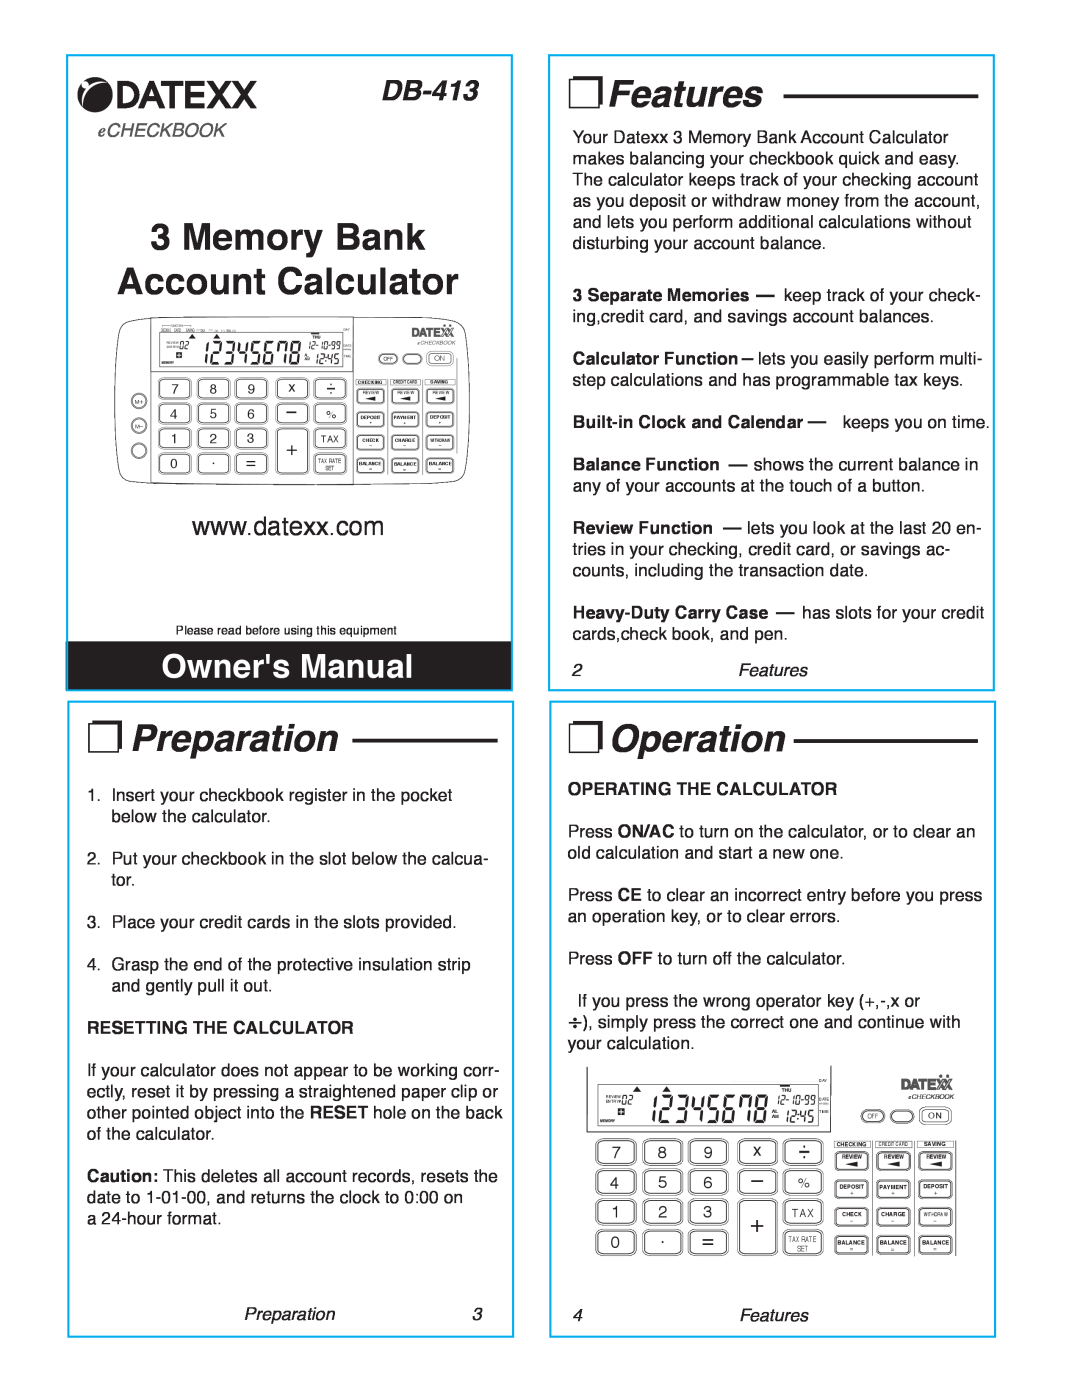 Datexx DB-413 owner manual Memory Bank Account Calculator, Features, Preparation, Operation, Owners Manual, eCHECKBOOK 